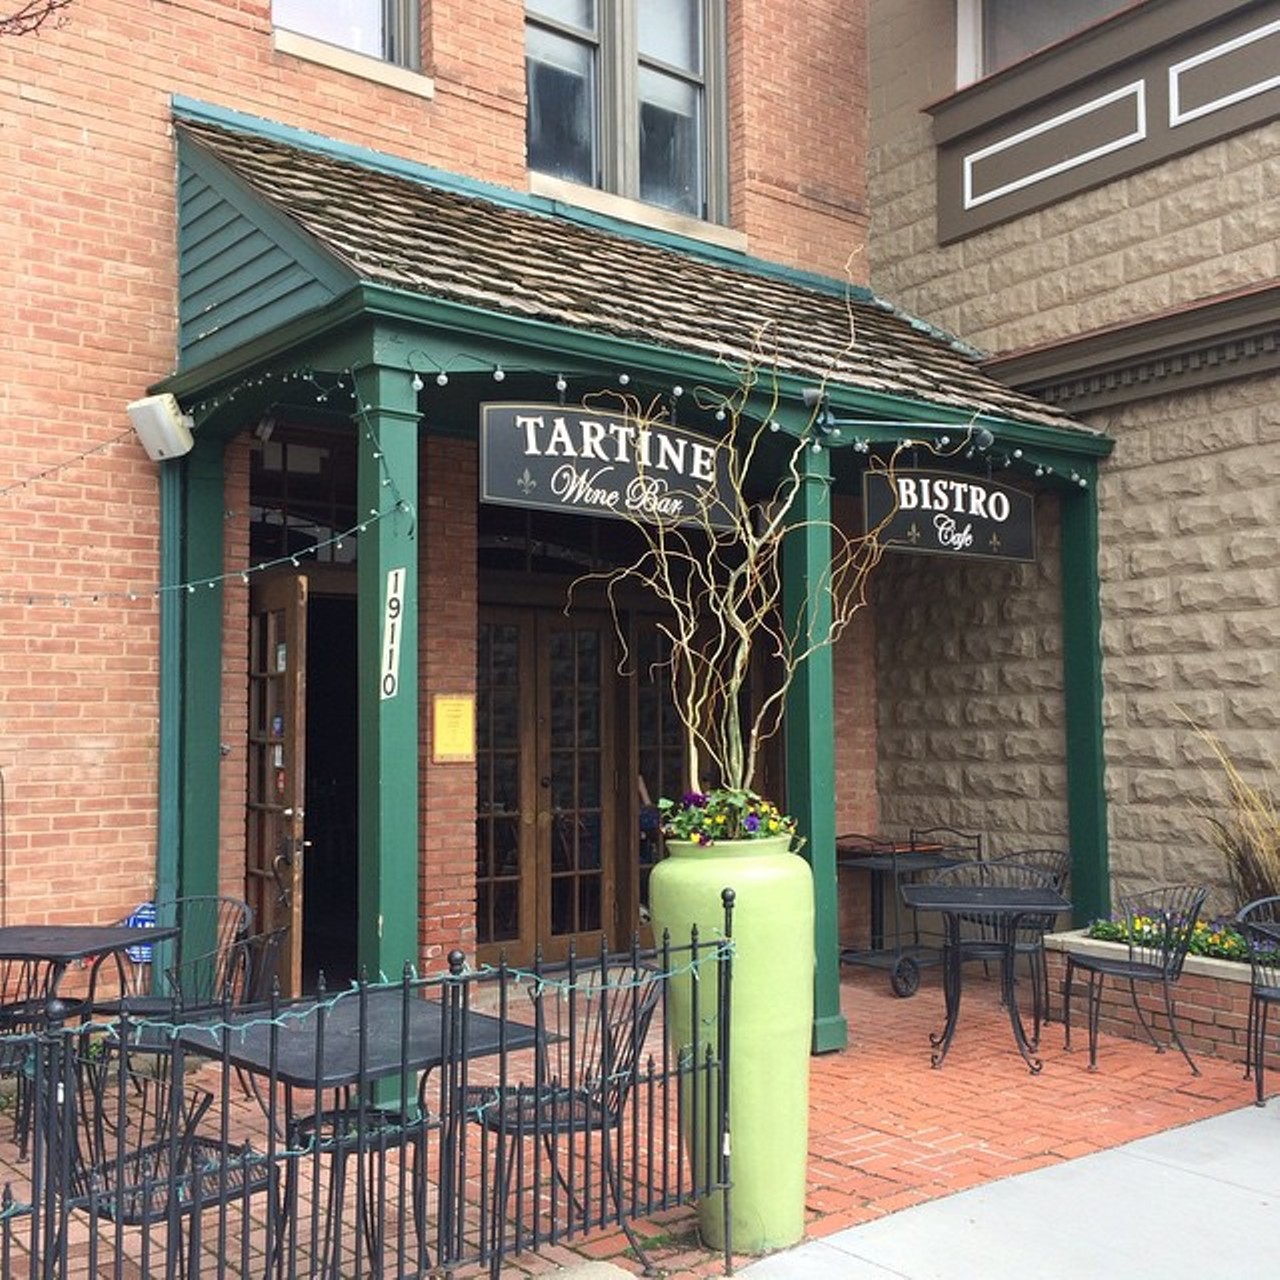 When you want to impress your snotty East Side pals - Tartine Bistro 
Let's face it: Eastsiders can be a tad judgmental when it comes to the far-West Side dining scene. But even the most jaded of urban explorers will leave Tartine Bistro (19110 Old Detroit Rd., 440-331-0800, tartinebistro.com) in Rocky River with newfound respect. The compact brick-paved courtyard is the ideal spot to sip wine, snack on small plates, and make some new friends. (Photo via Yelp, tsgcleveland)